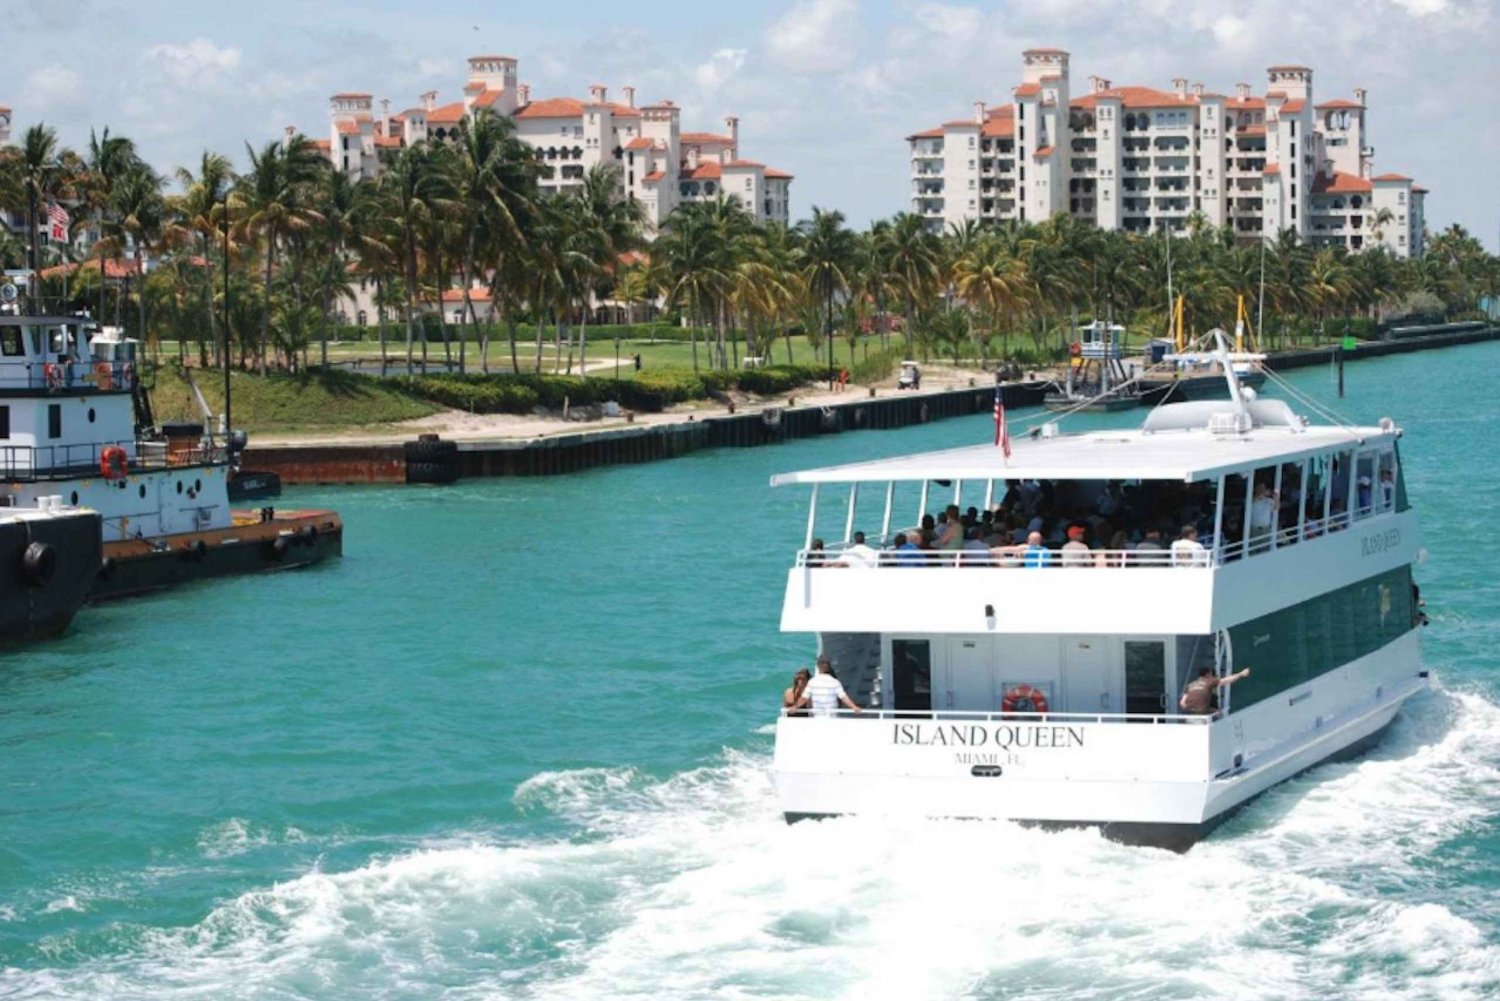 Miami: Guided Tour with Transfer from Cruise Port to Airport